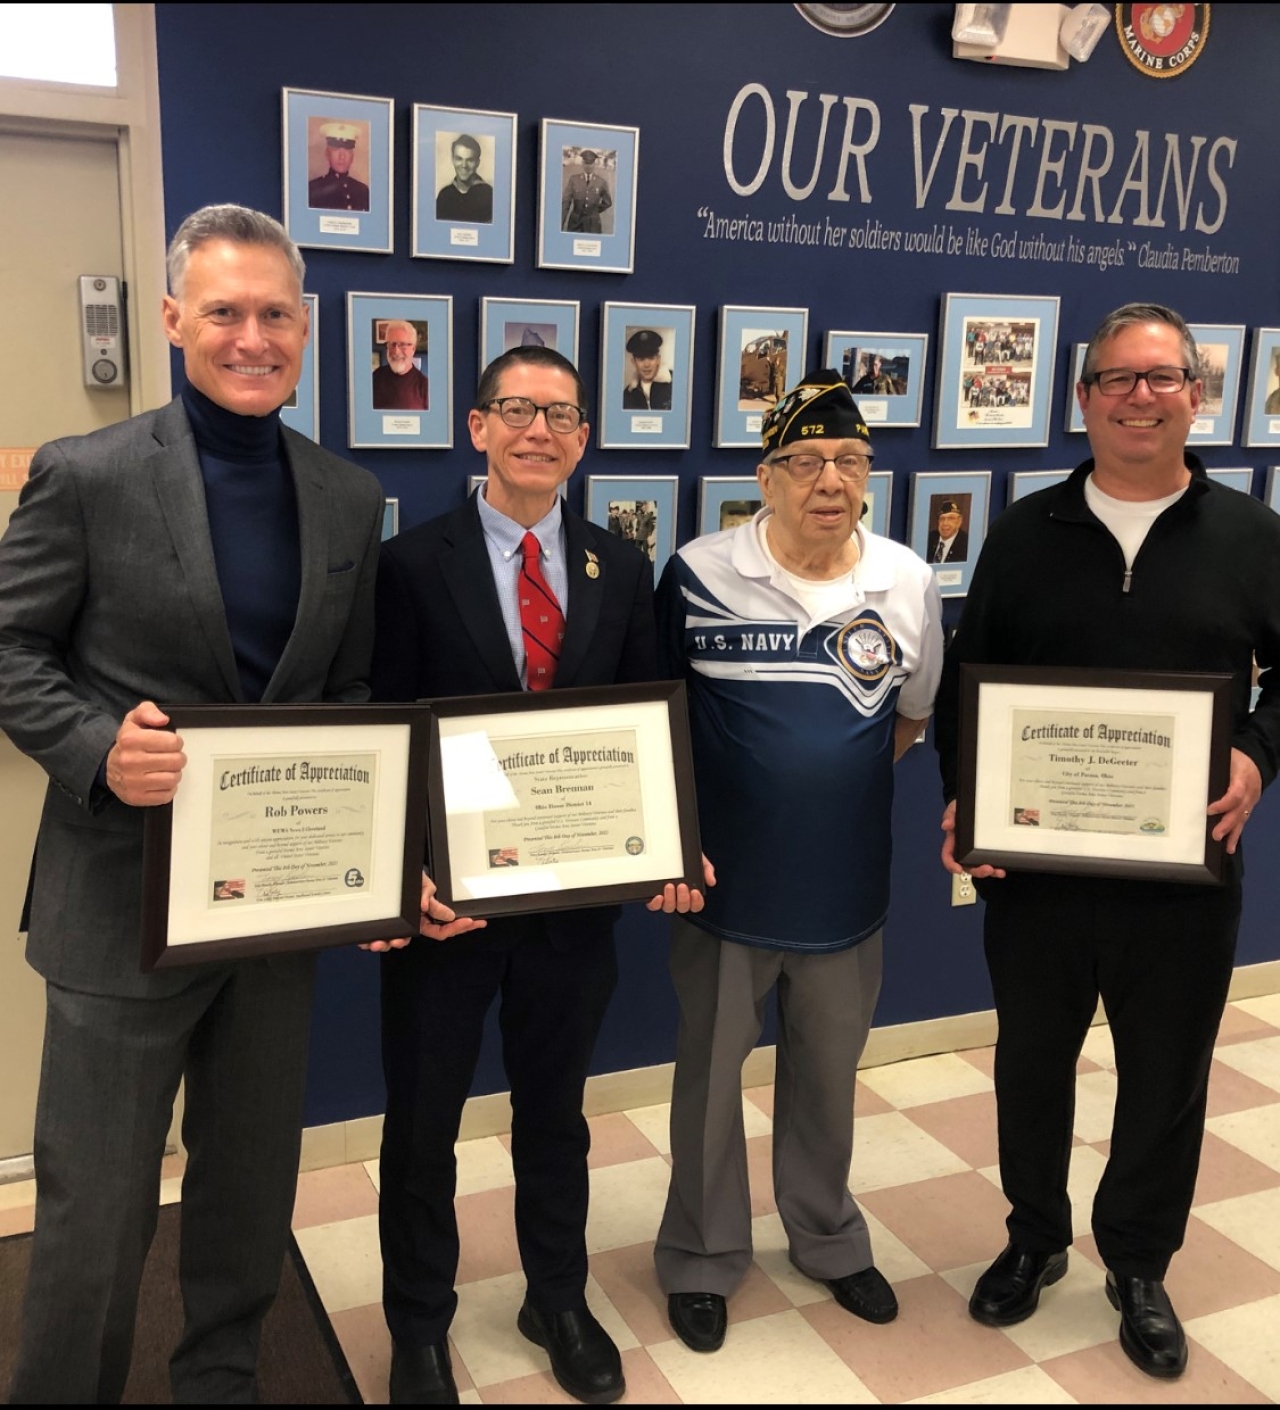 State Rep. Brennan, Parma Mayor Timothy DeGeeter, and WEWS Channel 5 Anchor Rob Powers, being honored by Parma Area Senior Veterans group commander Tony Kessler for their support of our military veter